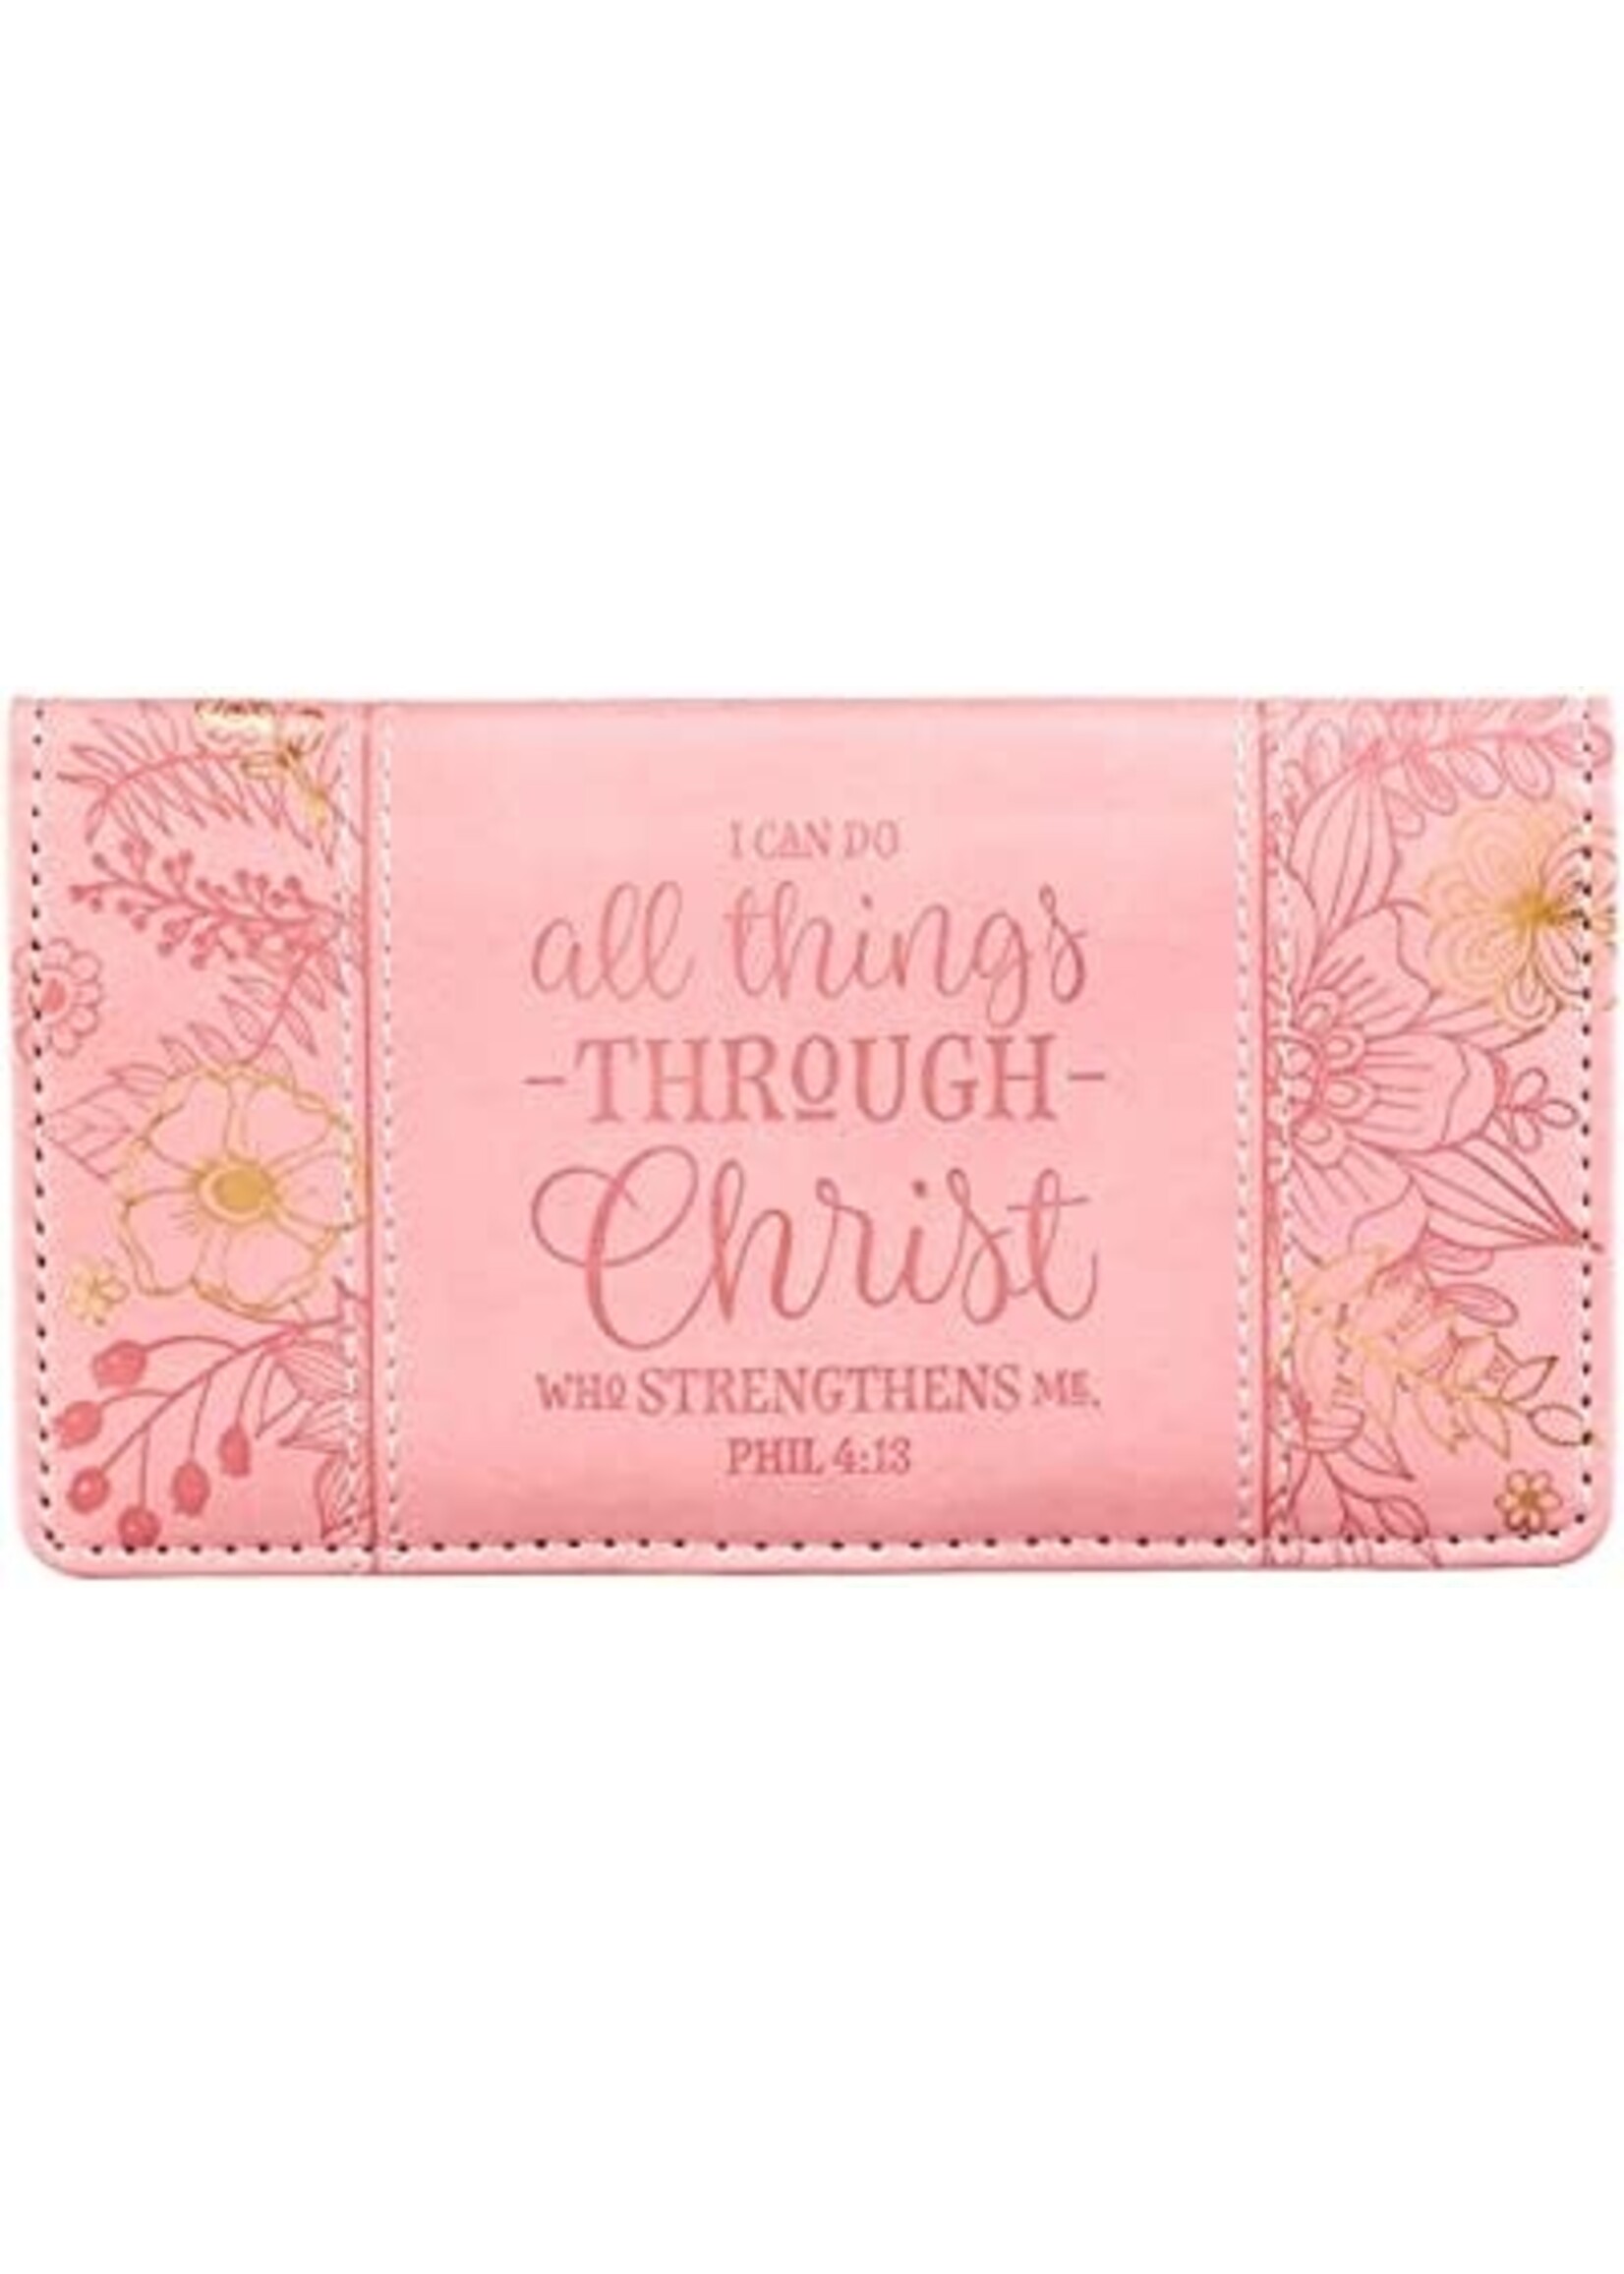 Checkbook Cover Pink Floral All Things Christ Phil. 4:13